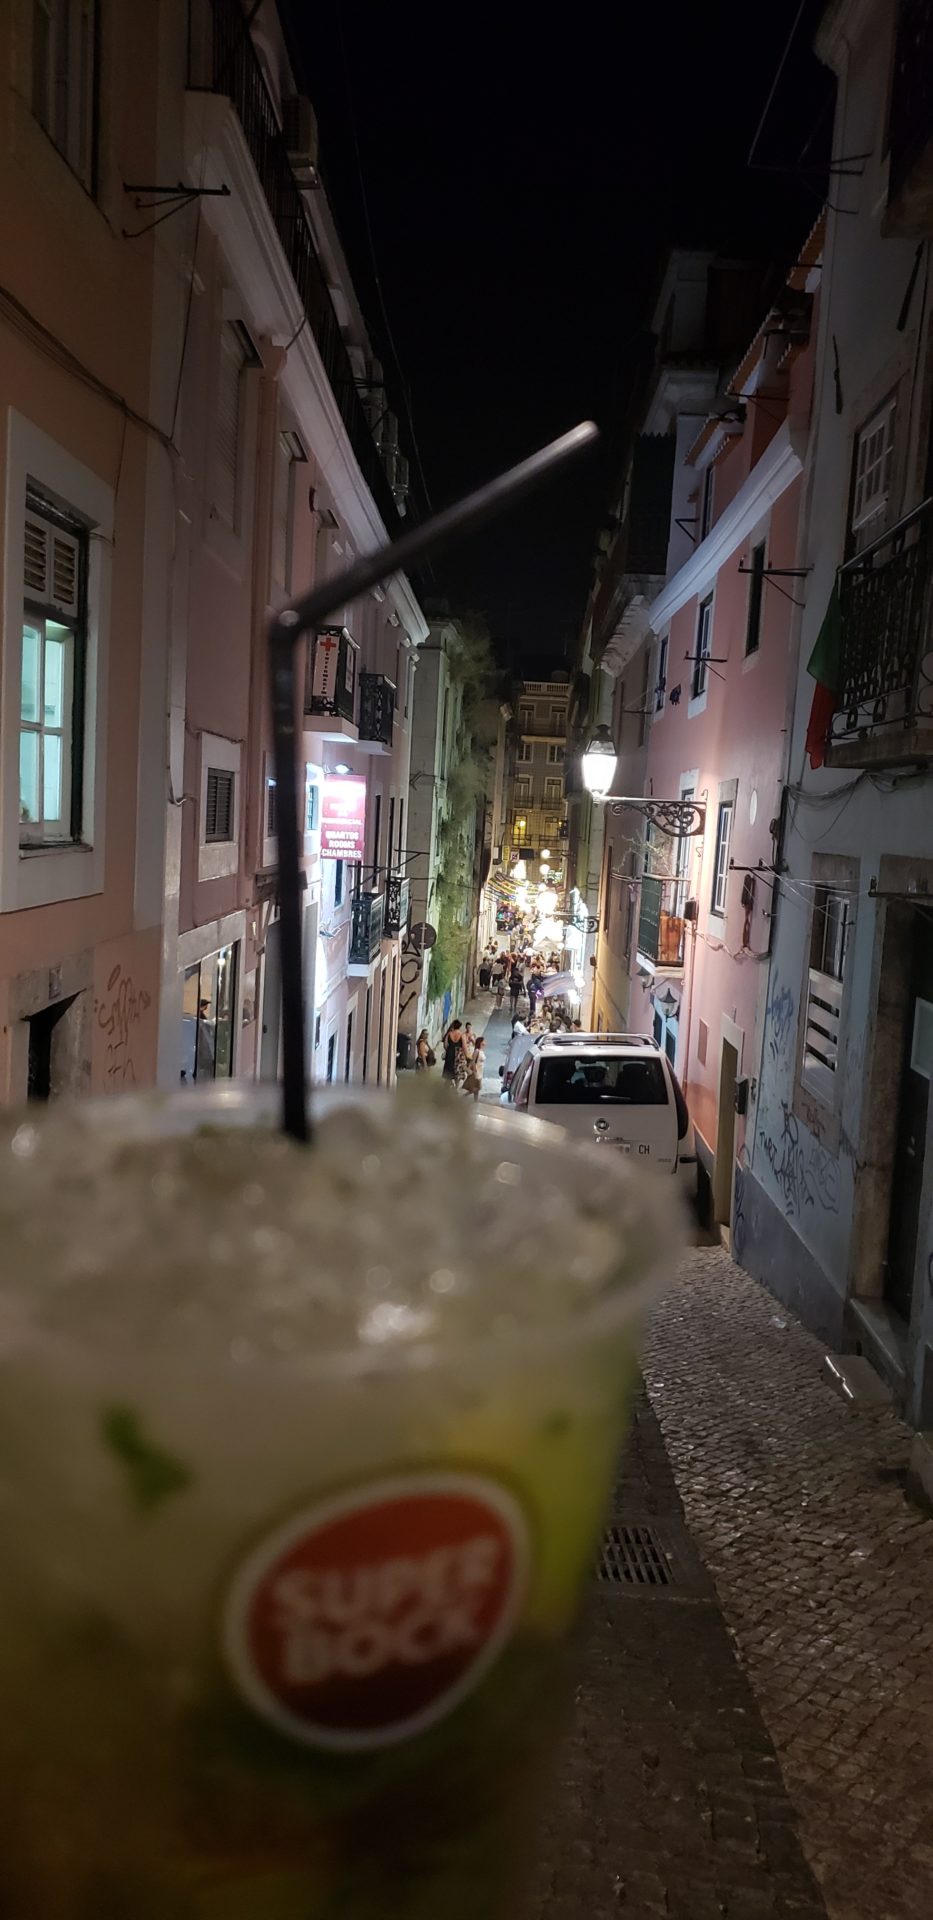 a drink in a cup on a narrow street